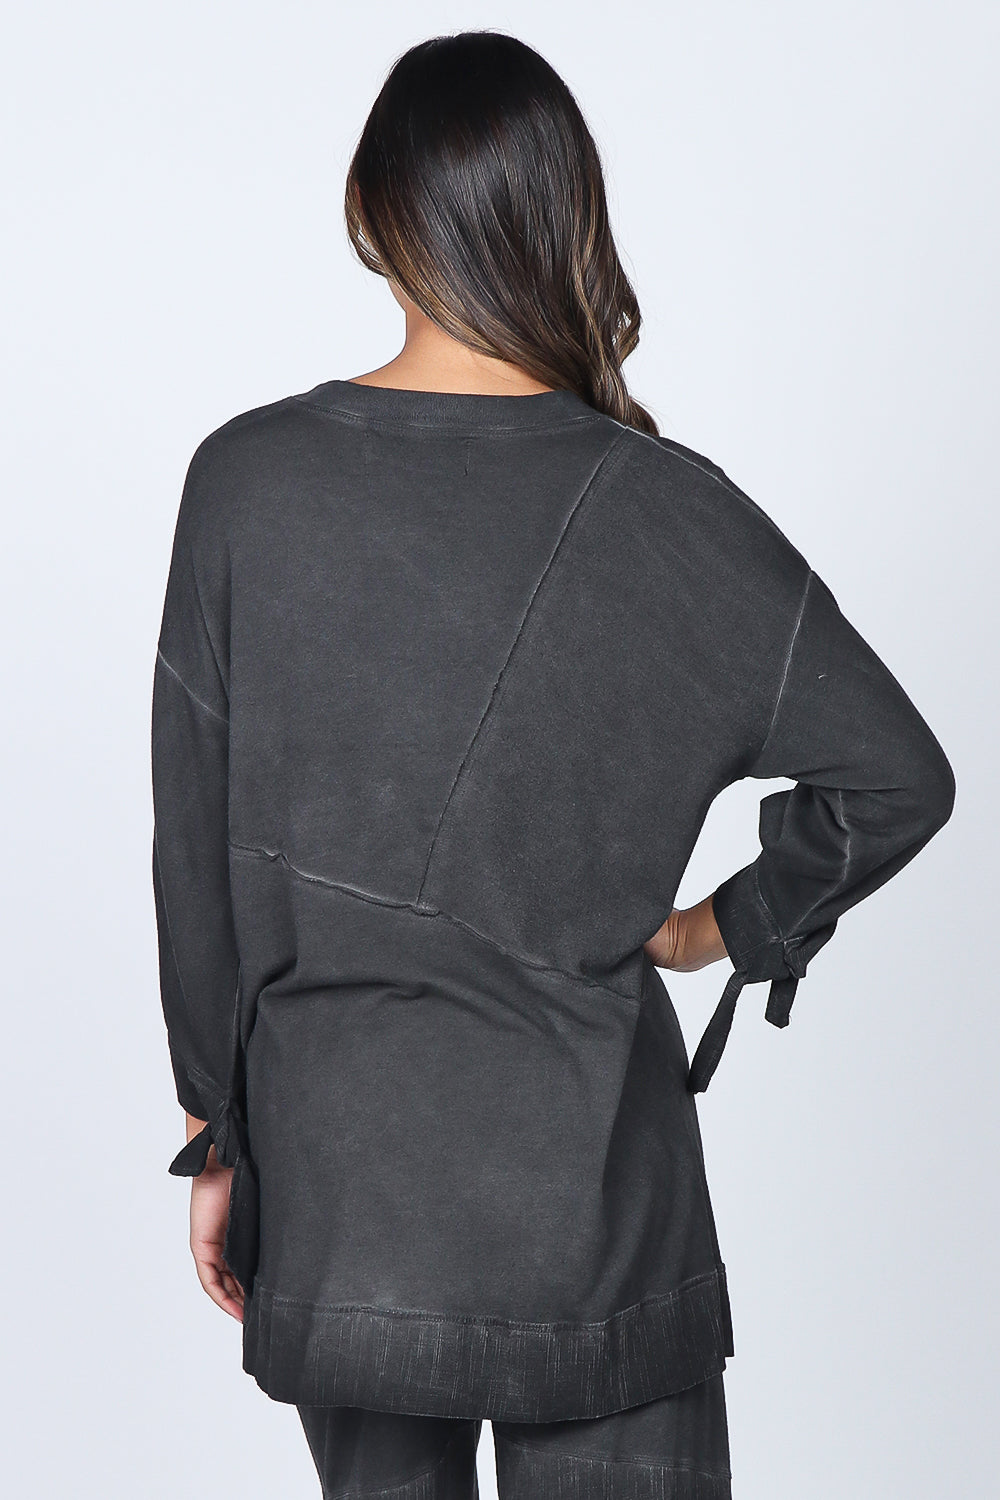 Asymmetrical Baby French Terry Tunic